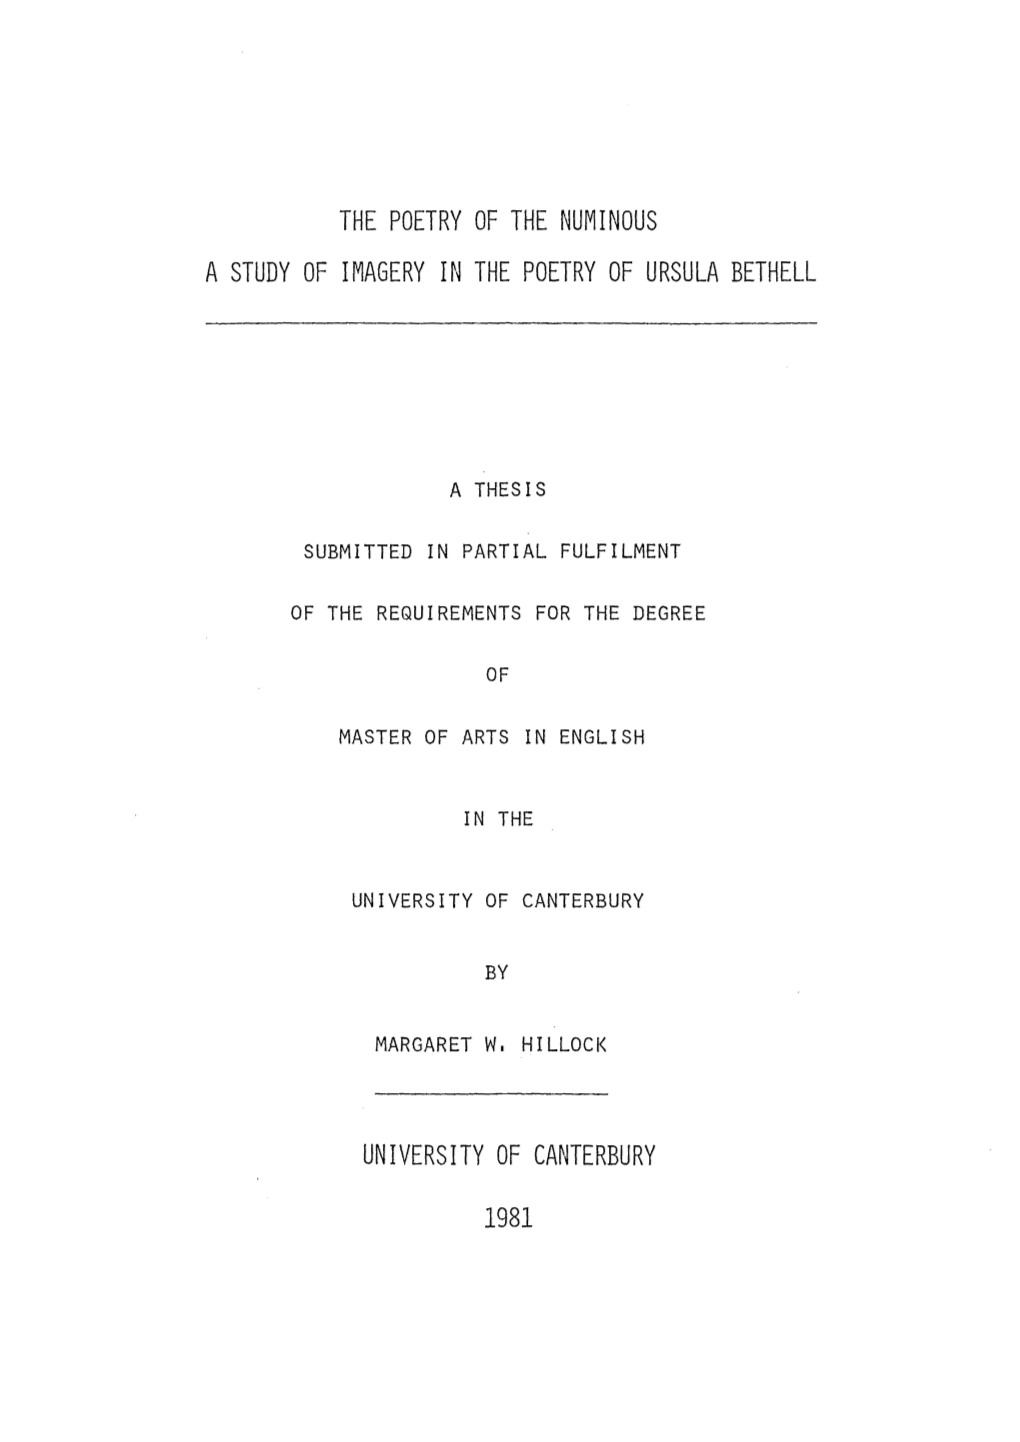 The Poetry of the Numinous a Study of Imagery in the Poetry of Ursula Bethell